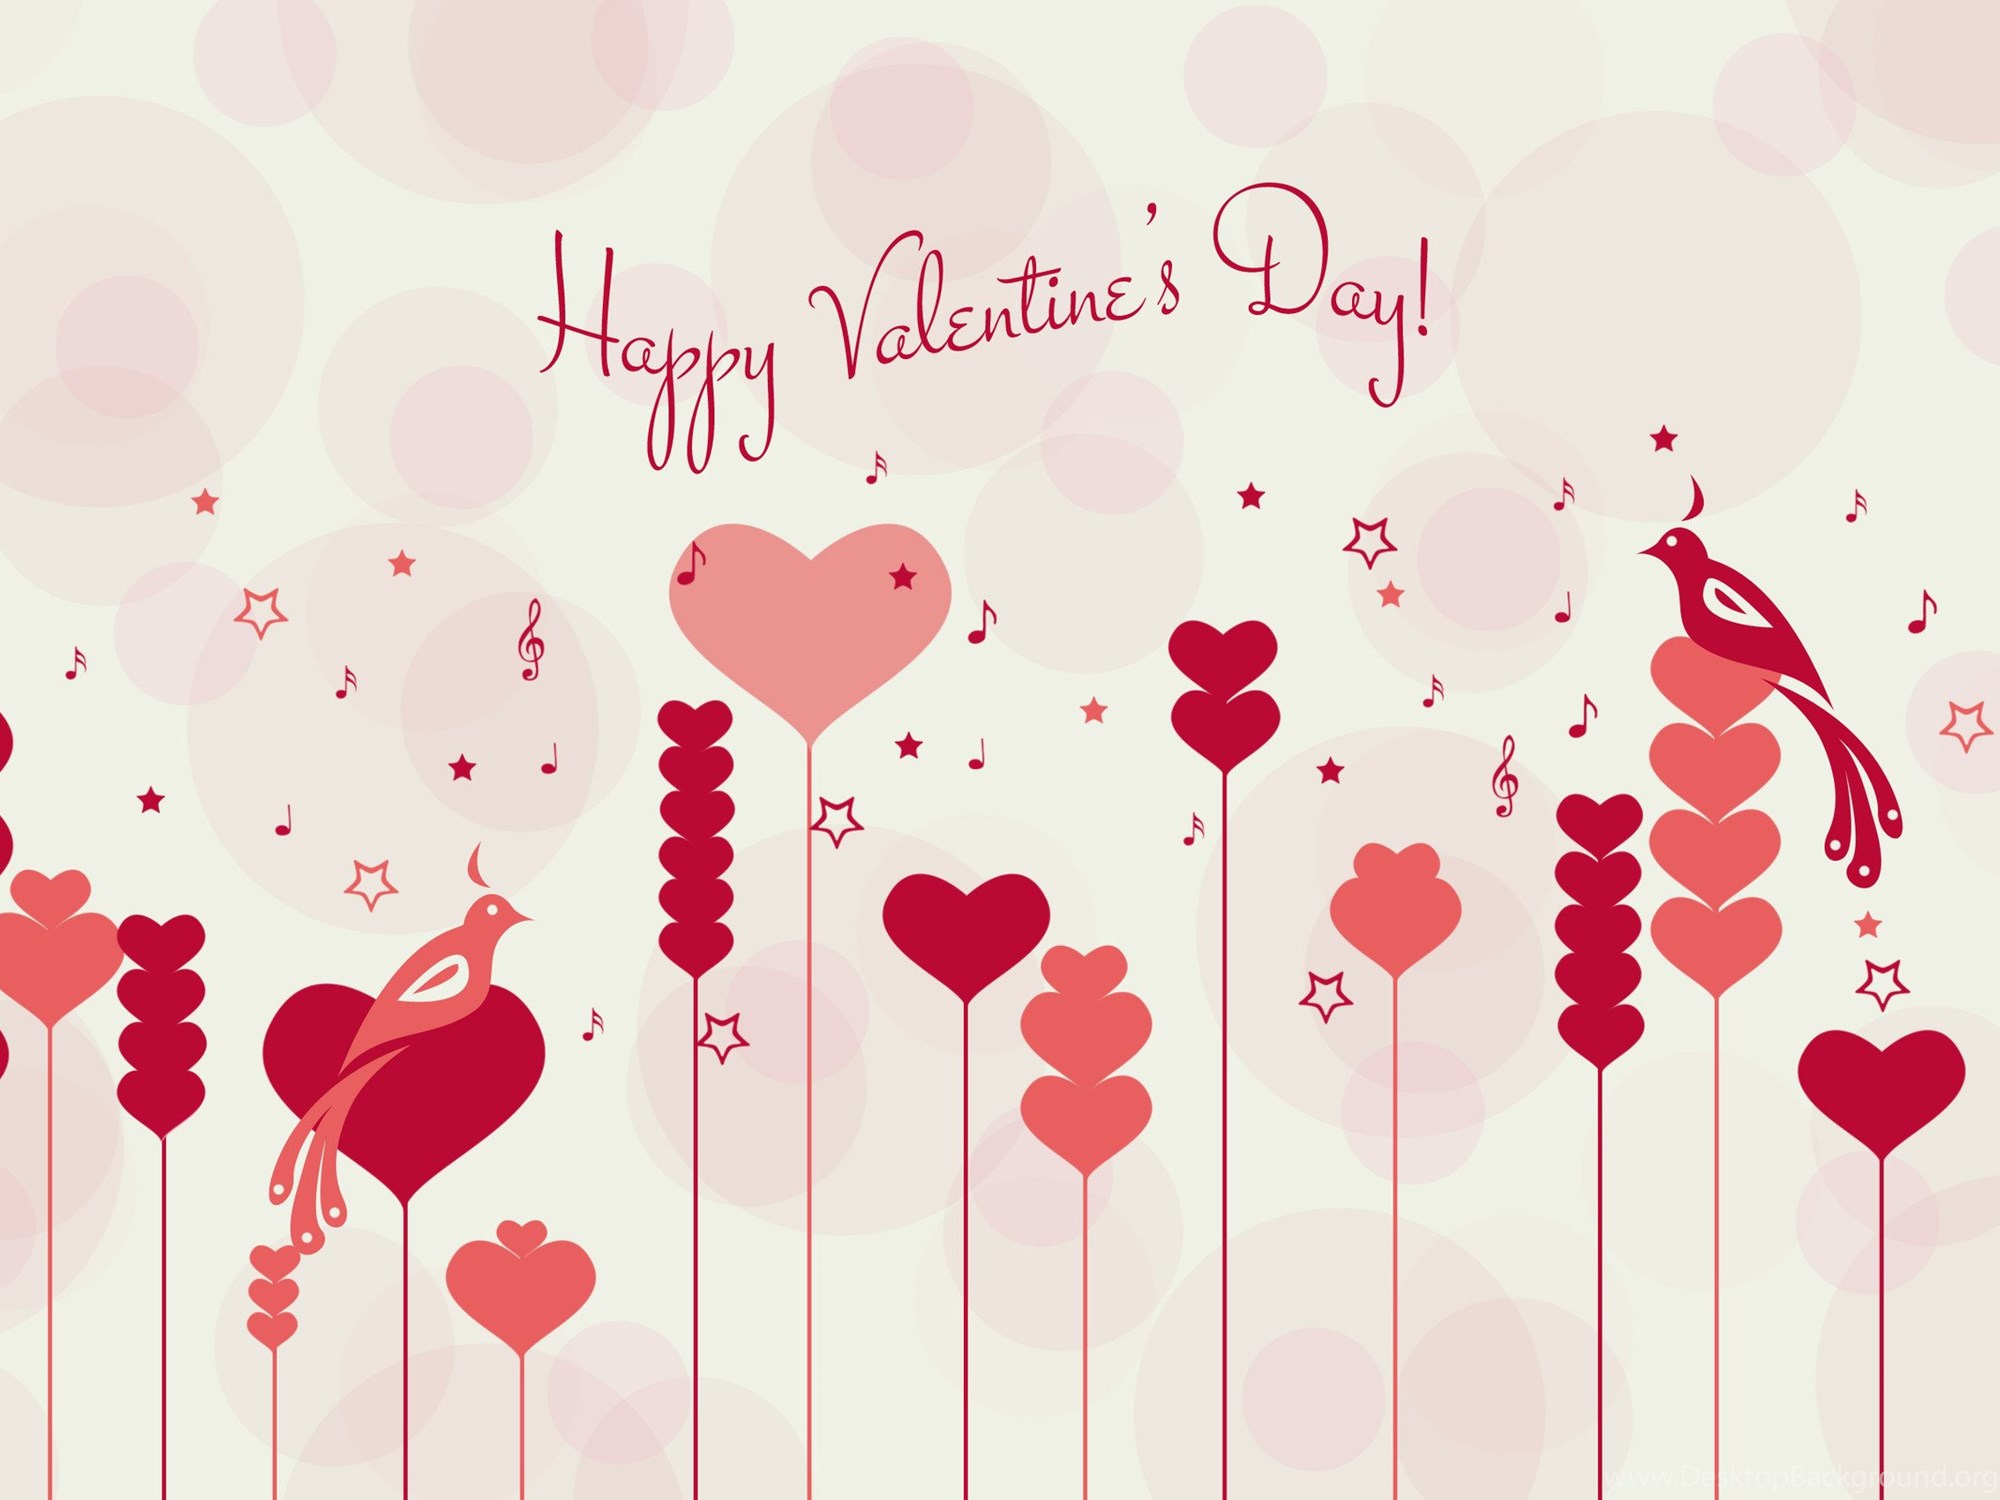 Download Rose For Valentines Day Wallpapers Fullscreen Standart 4:3 2000x15...